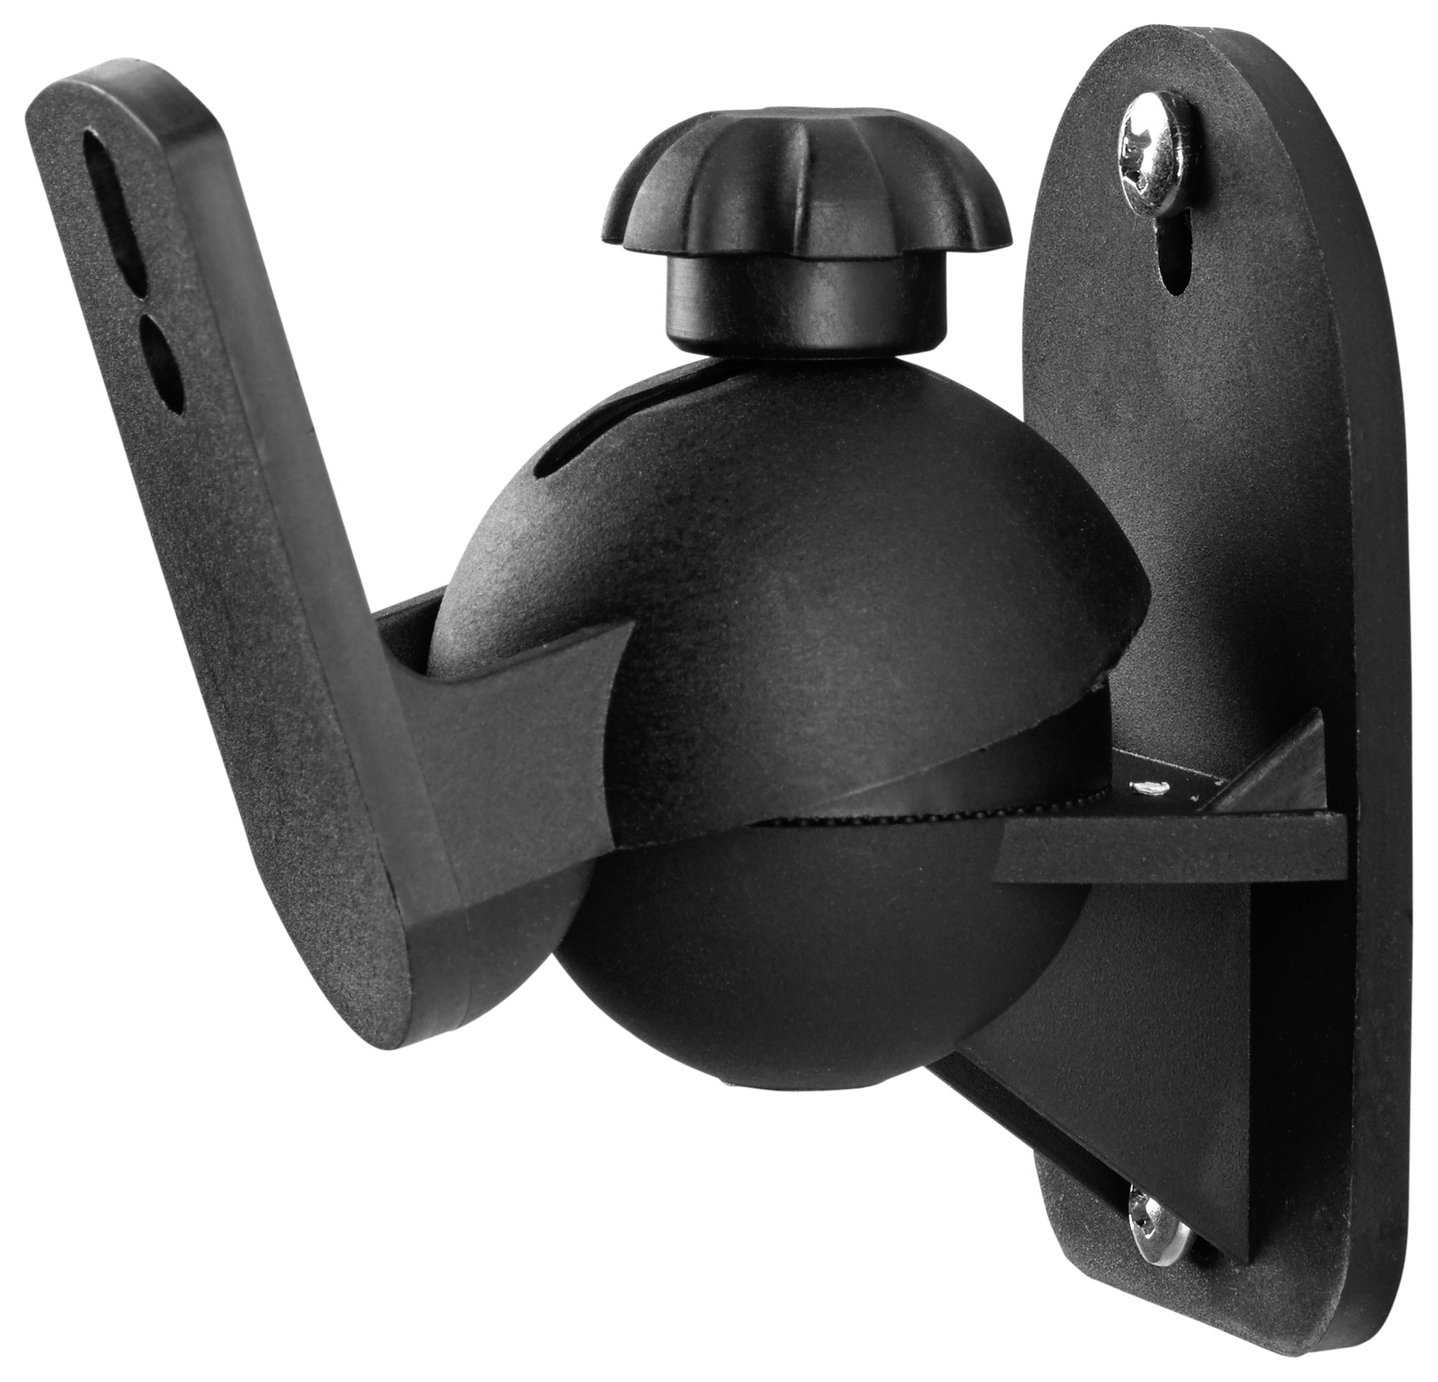 One For All WM5330 Universal Speaker Wall Mount Review